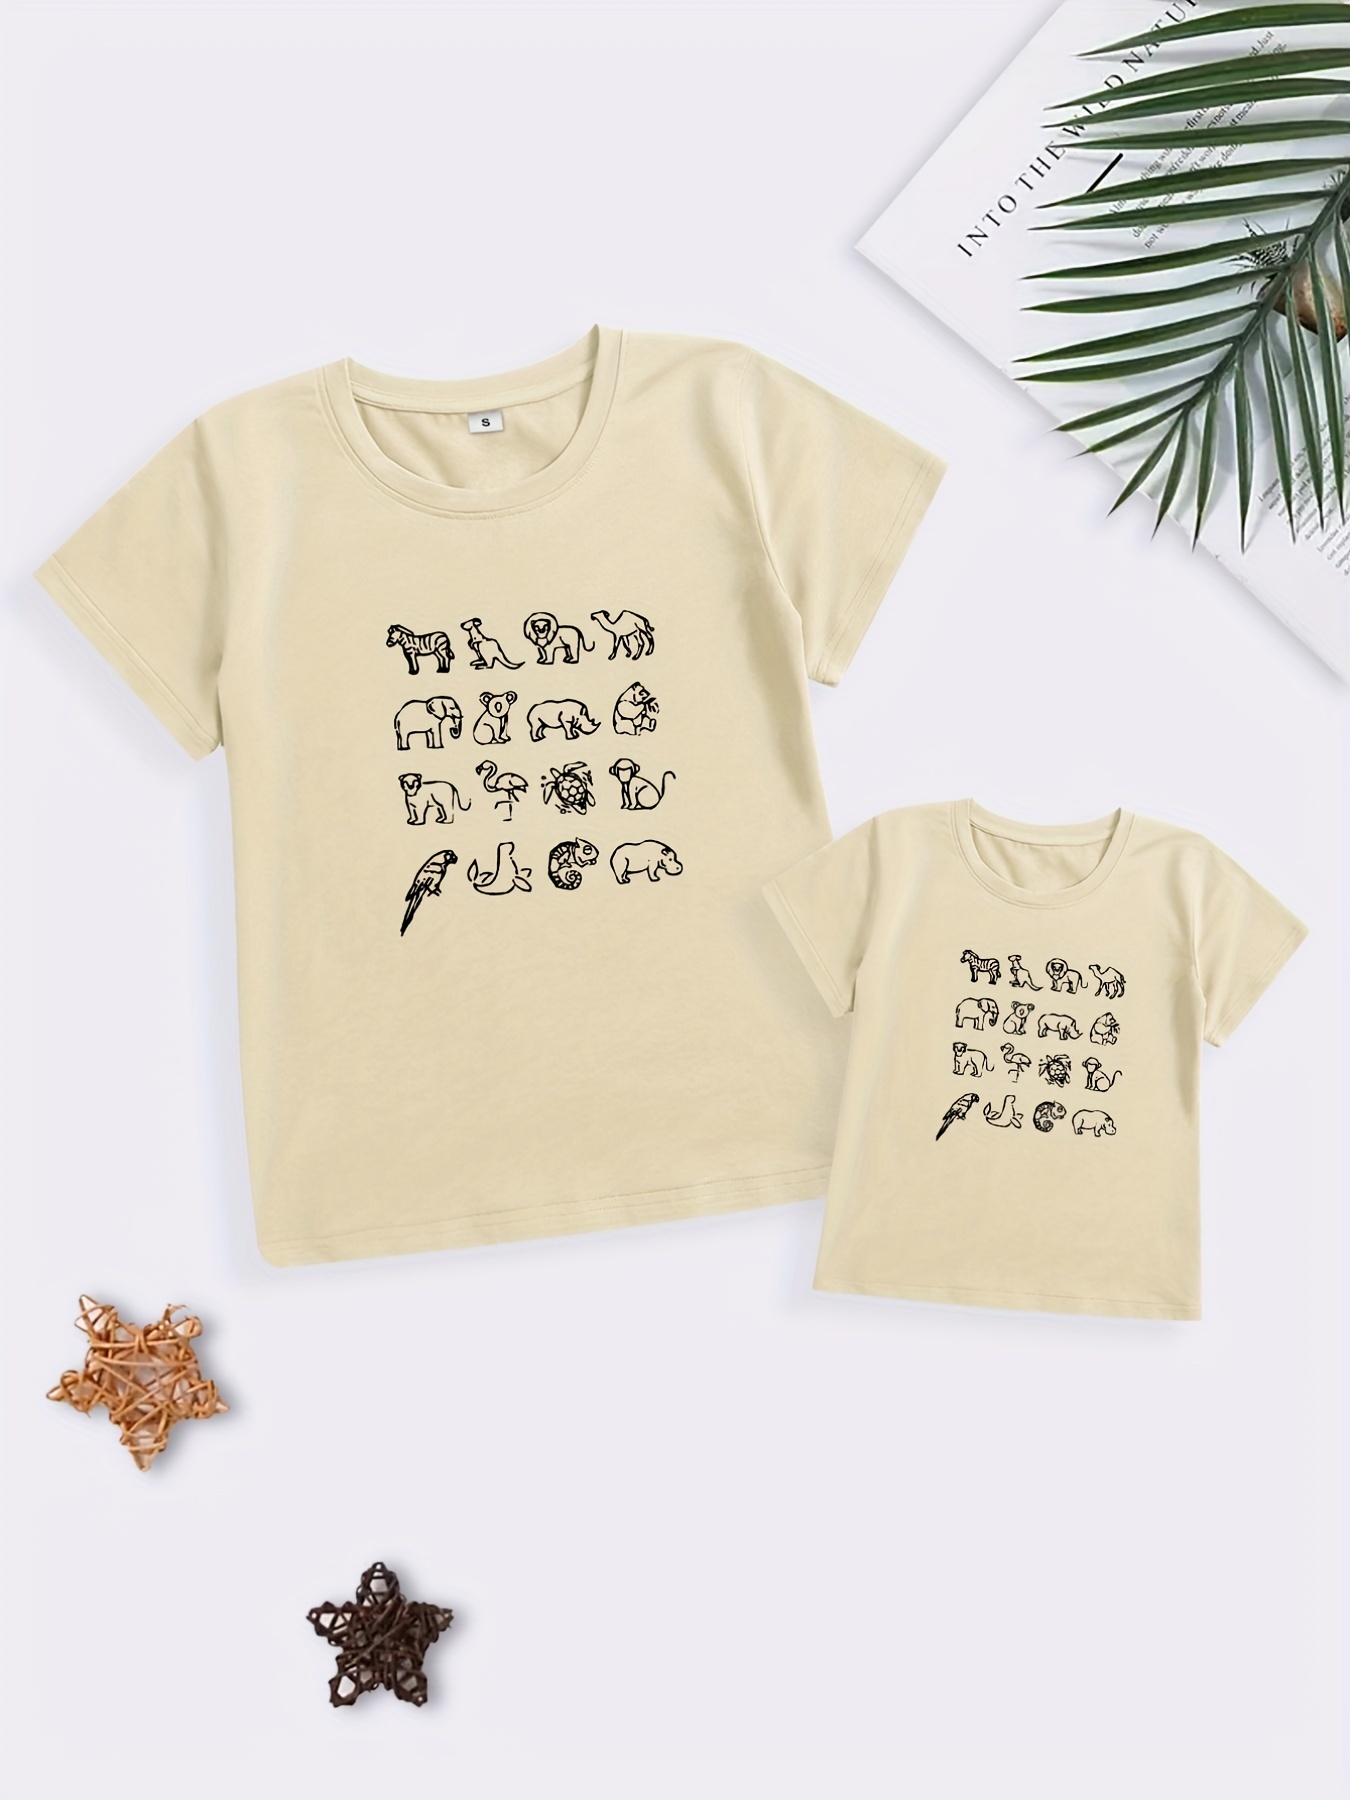 Mama Bear Baby Bear Matching Shirts Mommy and Me T Shirts Women Son  Daughter Mum Tops Kids Baby Girl Boys Casual T Shirt Outfits